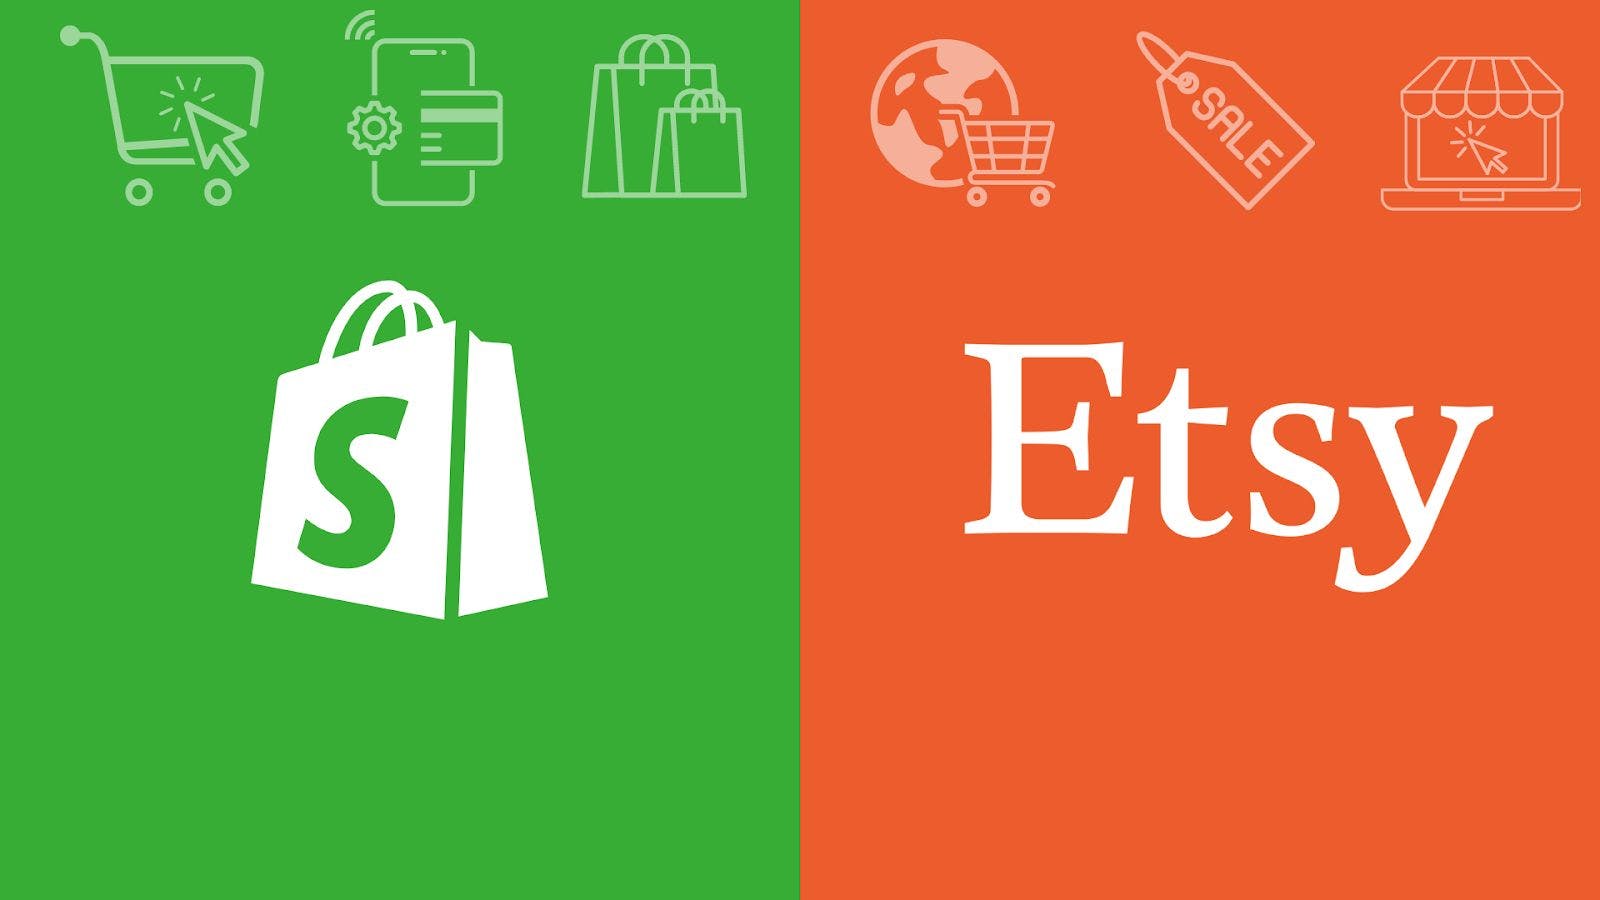 Shopify vs. Etsy: Which Is Best For You?